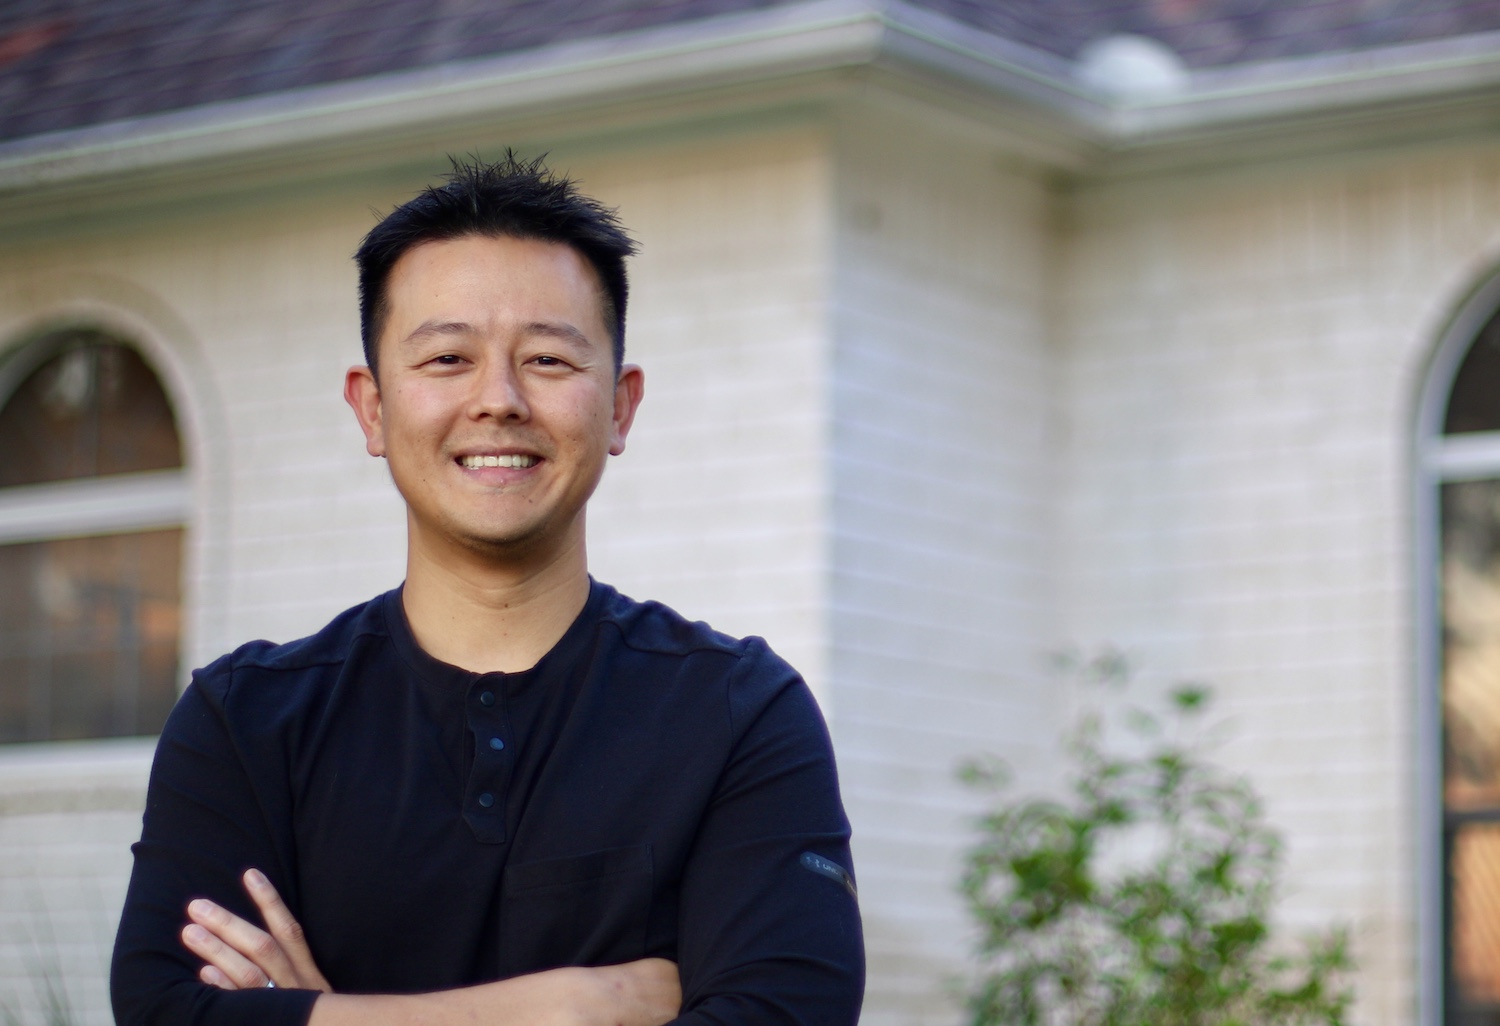 Allen Tsai is the founder and CEO of Pani.